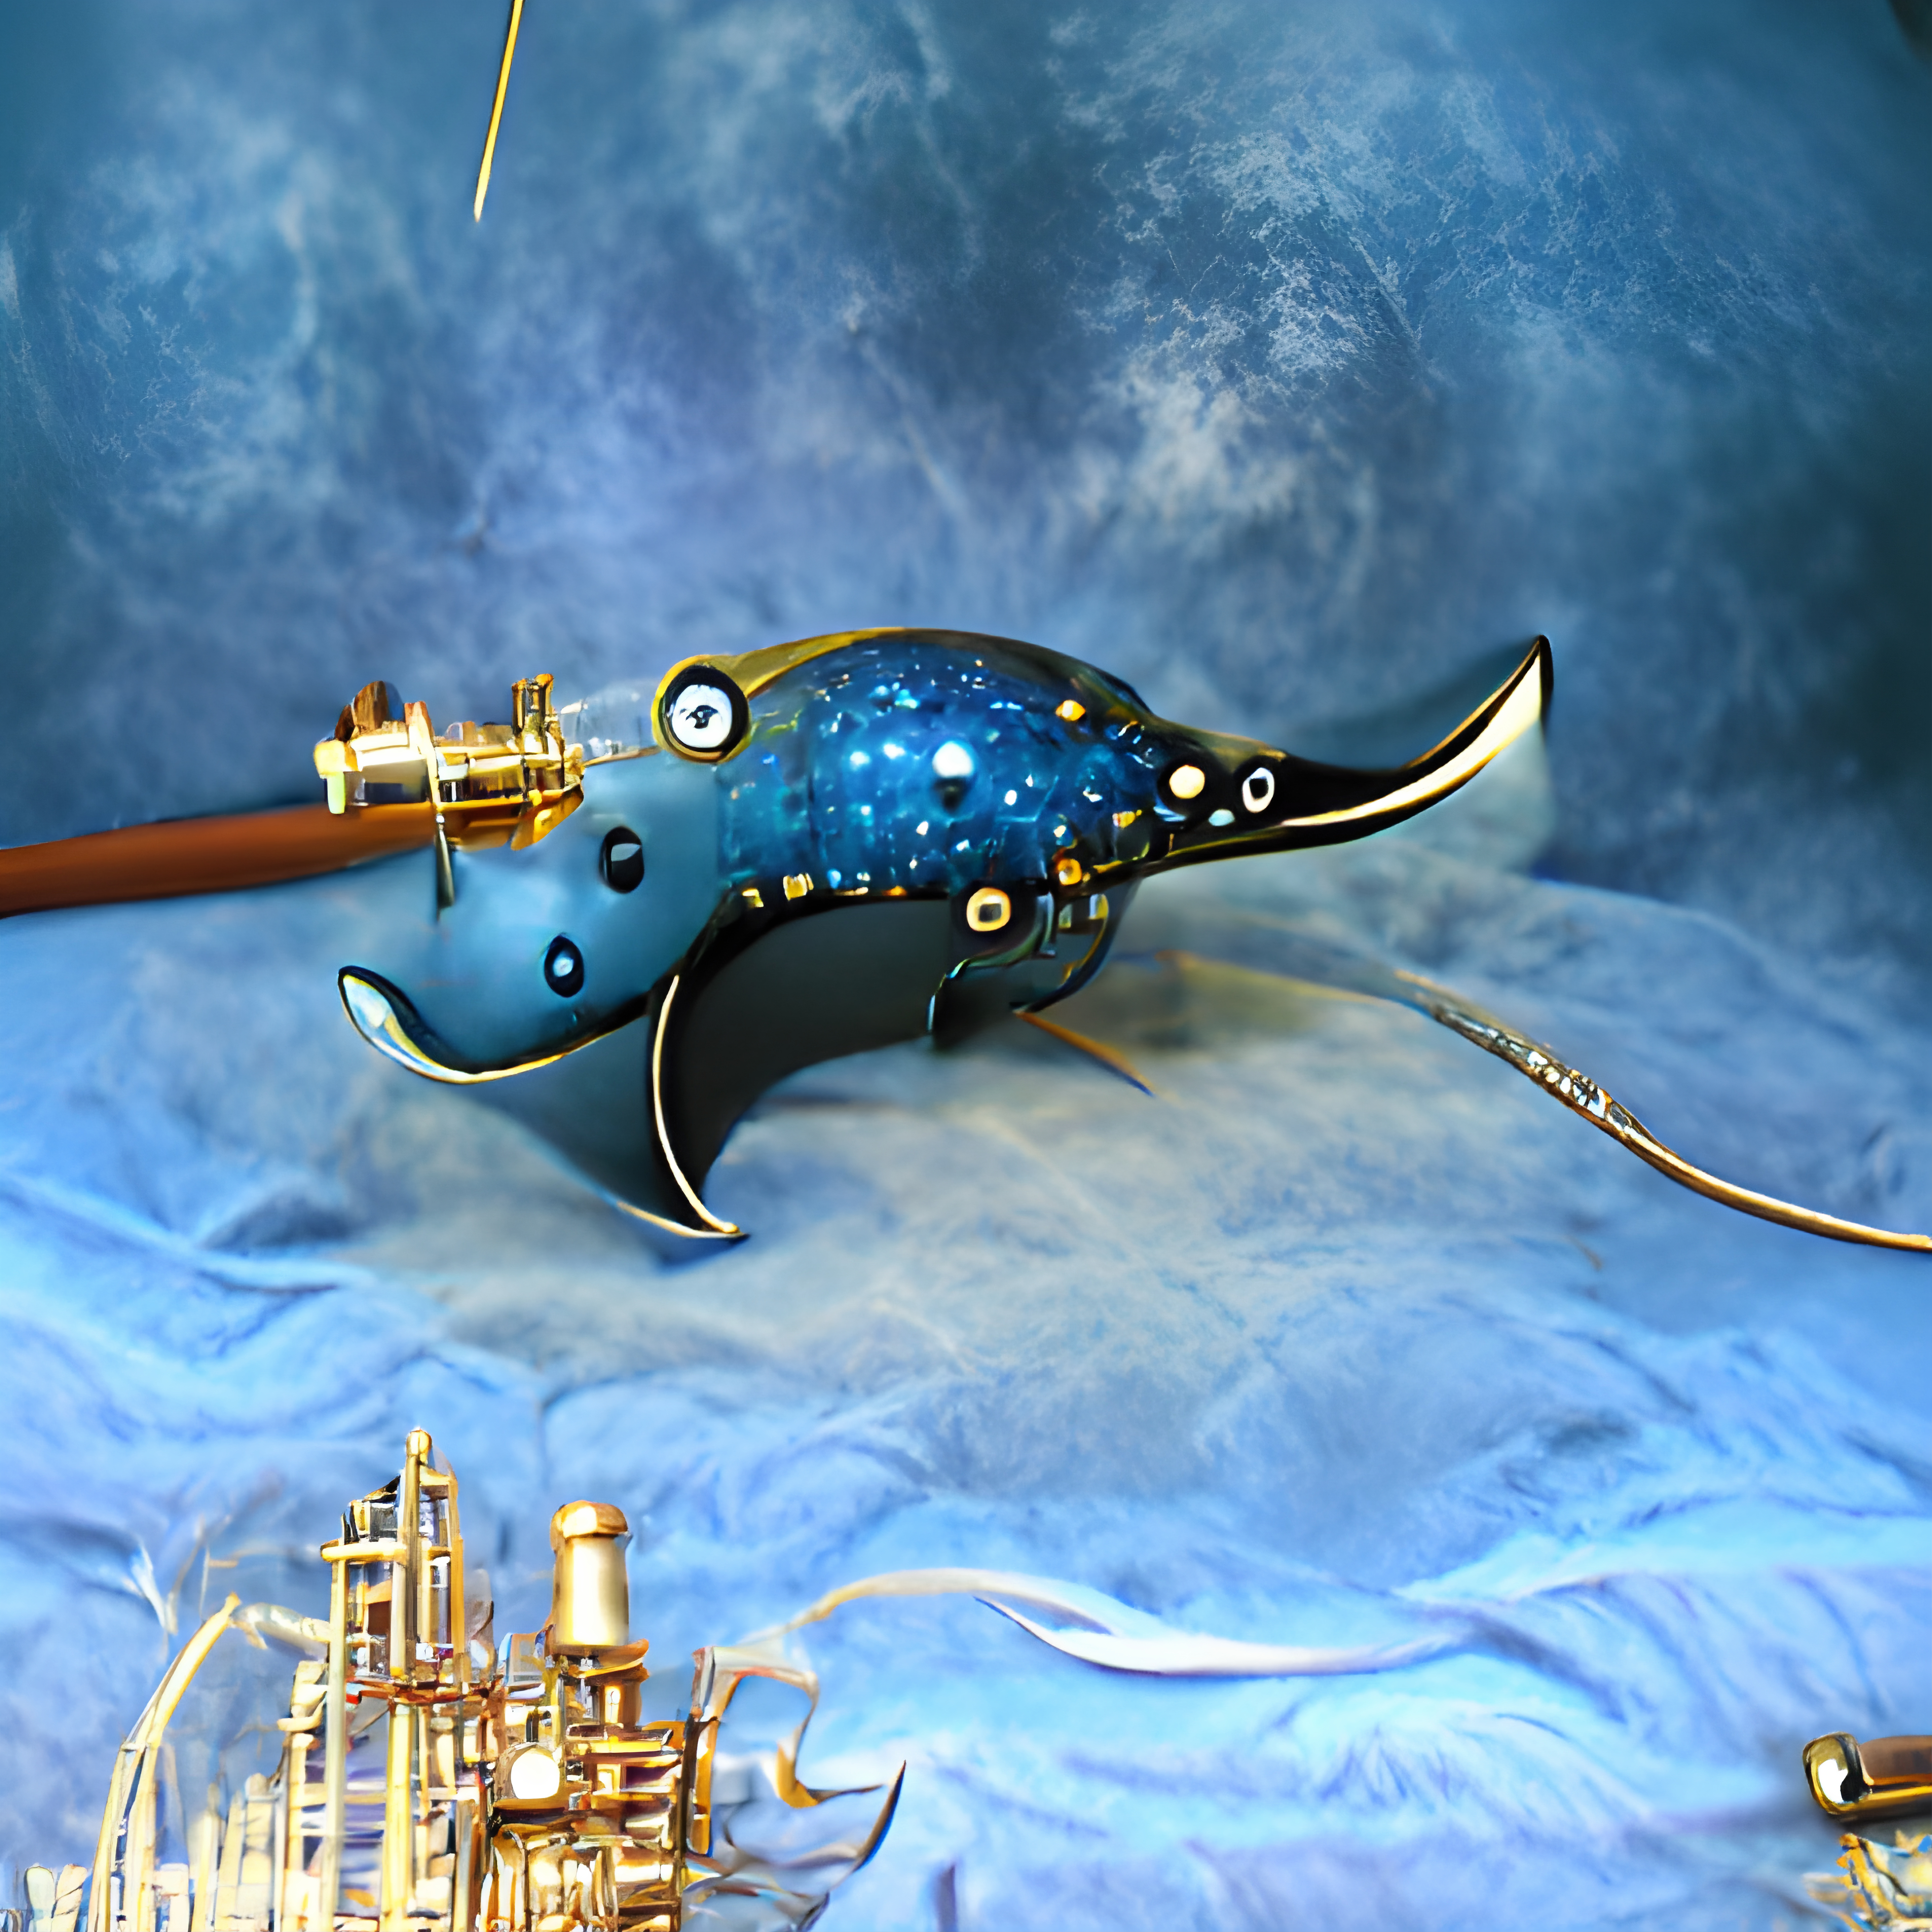 The Mighty Narwhal